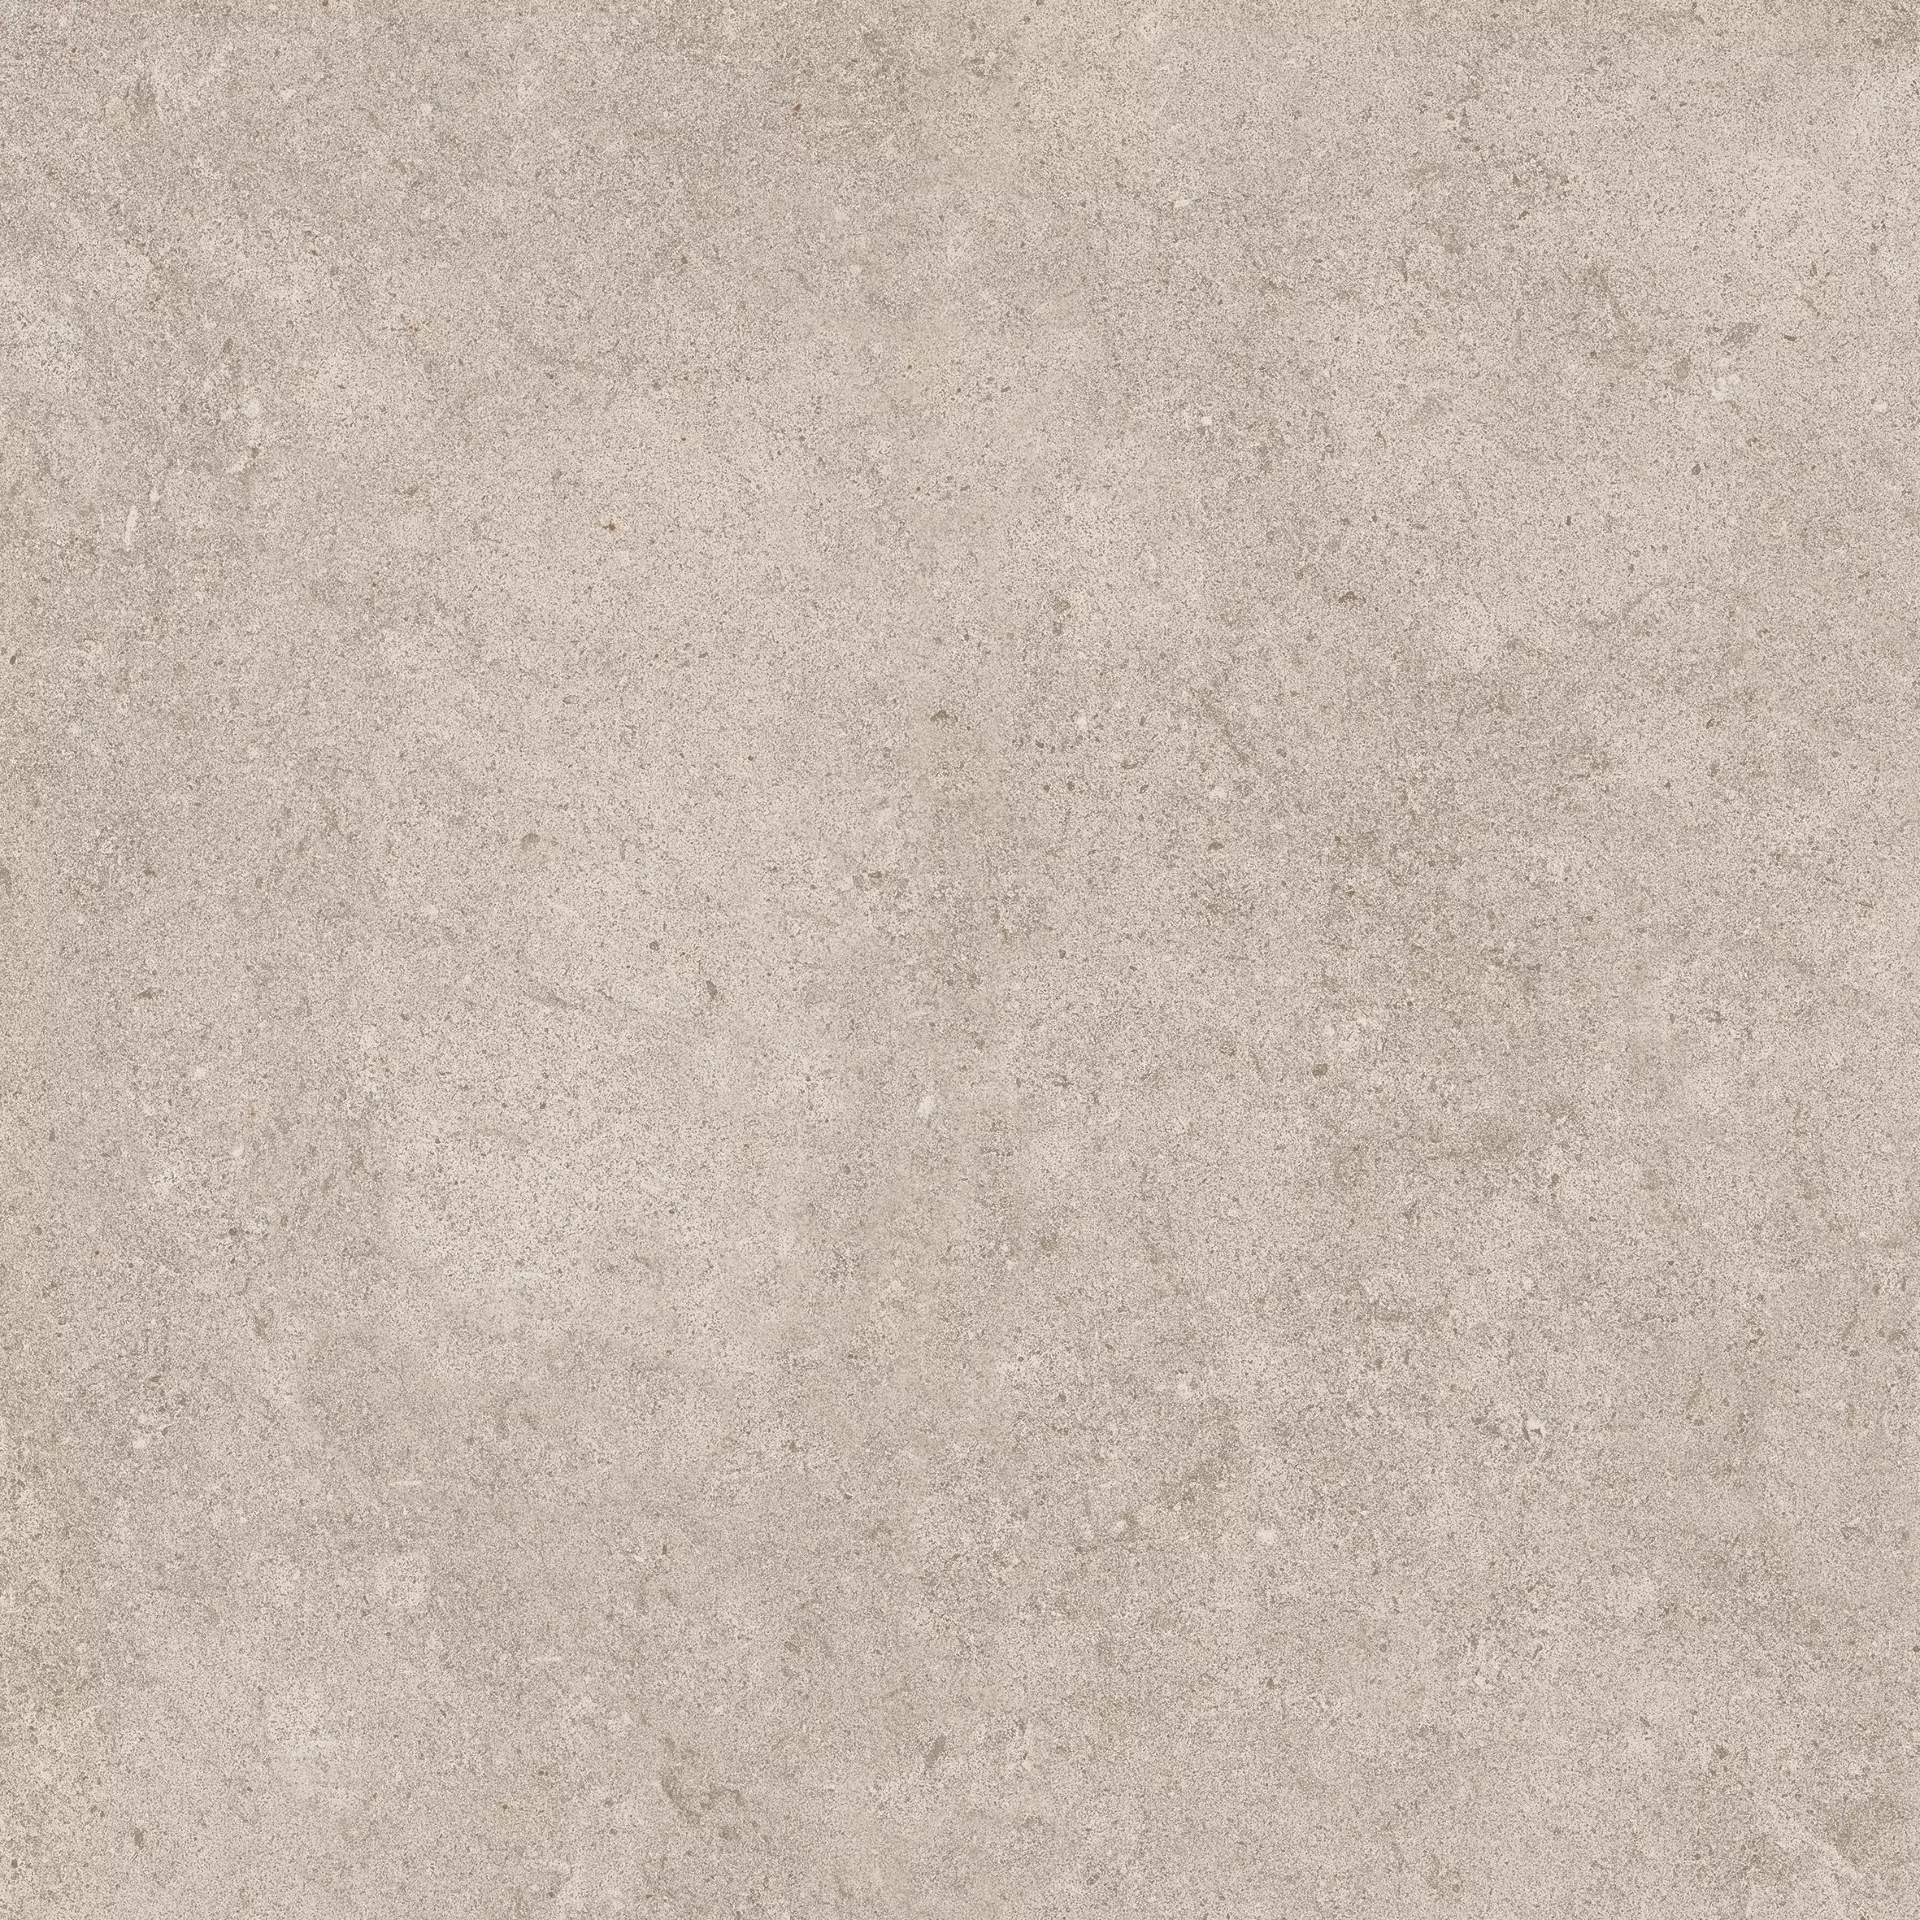 Sant Agostino Highstone Greige Natural CSAHS7GR90 90x90cm rectified 10mm